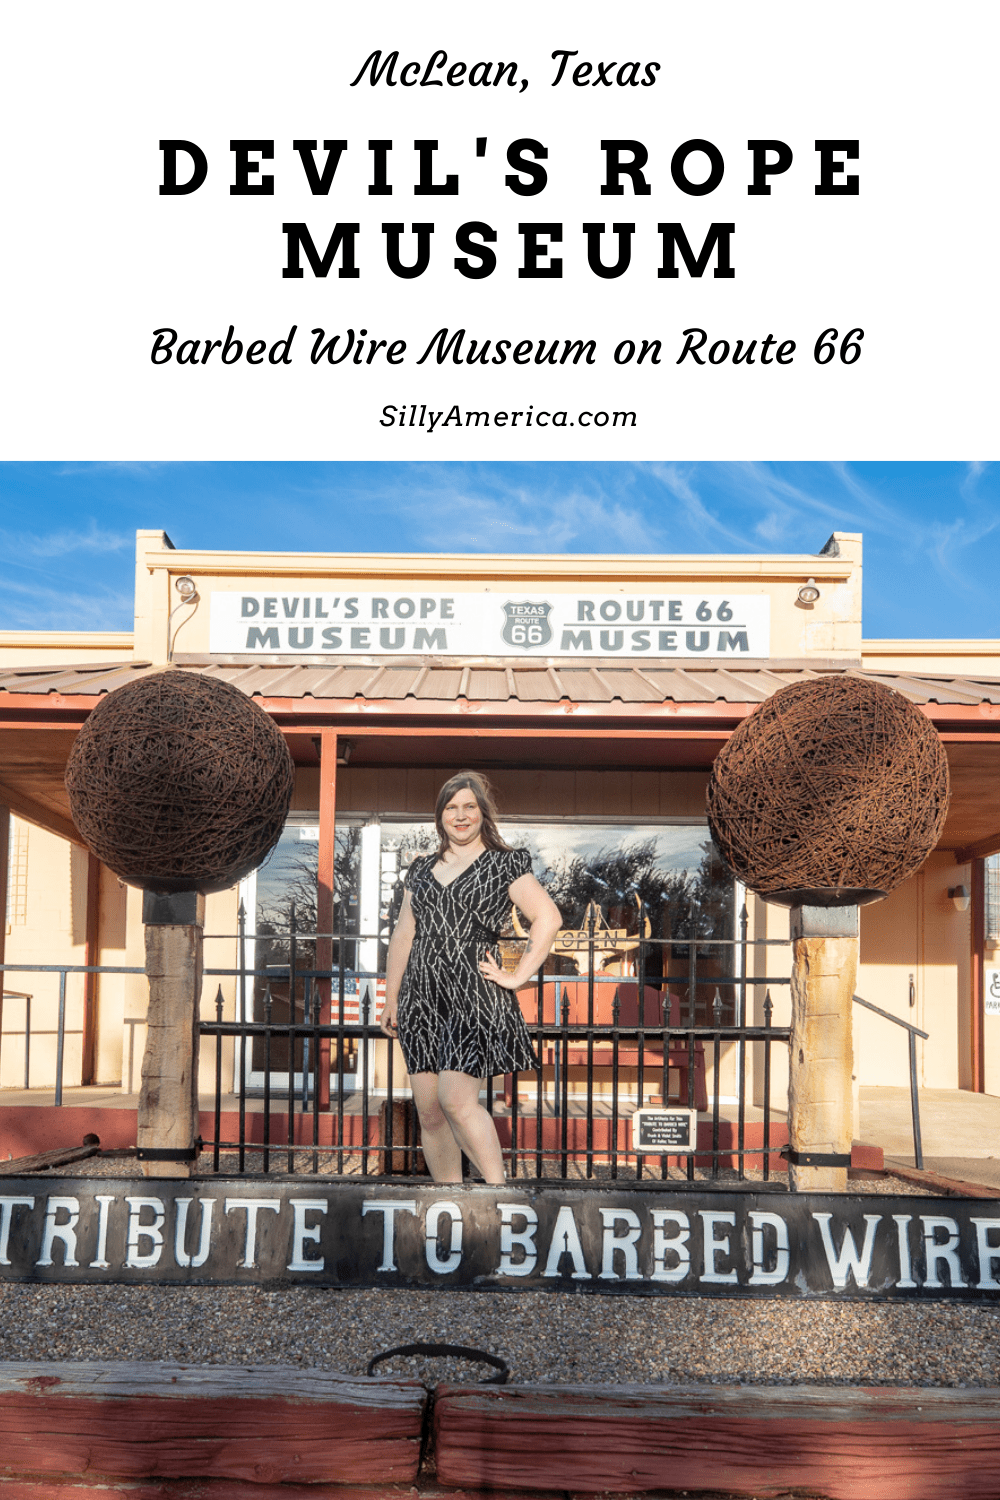 They say that good fences make good neighbors. And if that is the case the Devil's Rope Museum in McLean, Texas must have some pretty fantastic neighbors. This Route 66 attraction is dedicated to an unlikely and pretty sharp subject: barbed wire fencing. Add the barbed wire museum in Texas to your travel itinerary. #RoadTrips #RoadTripStop #Route66 #Route66RoadTrip #TexasRoute66 #Texas #TexasRoadTrip #TexasRoadsideAttractions #RoadsideAttractions #RoadsideAttraction #RoadsideAmerica #RoadTrip 